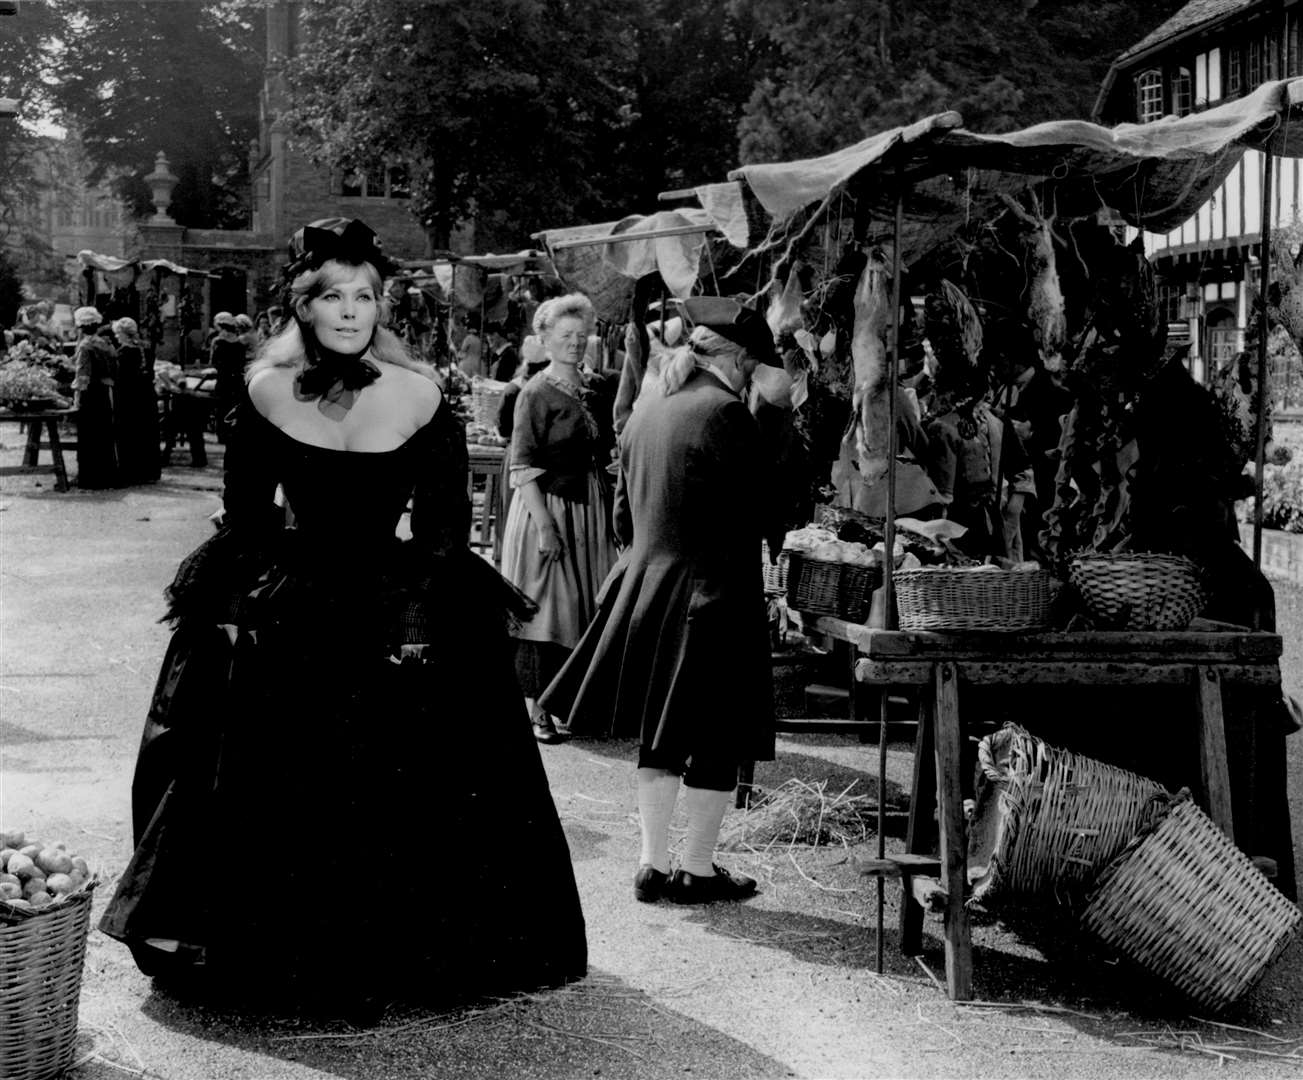 Kim Novak was in Chilham in the summer of 1964 to film The Amorous Adventures of Moll Flanders. There was filming inside the castle, the square and castle grounds. It also starred George Sanders, Angela Lansbury and Leo McKern. The square was transformed into an 18th century market for this scene